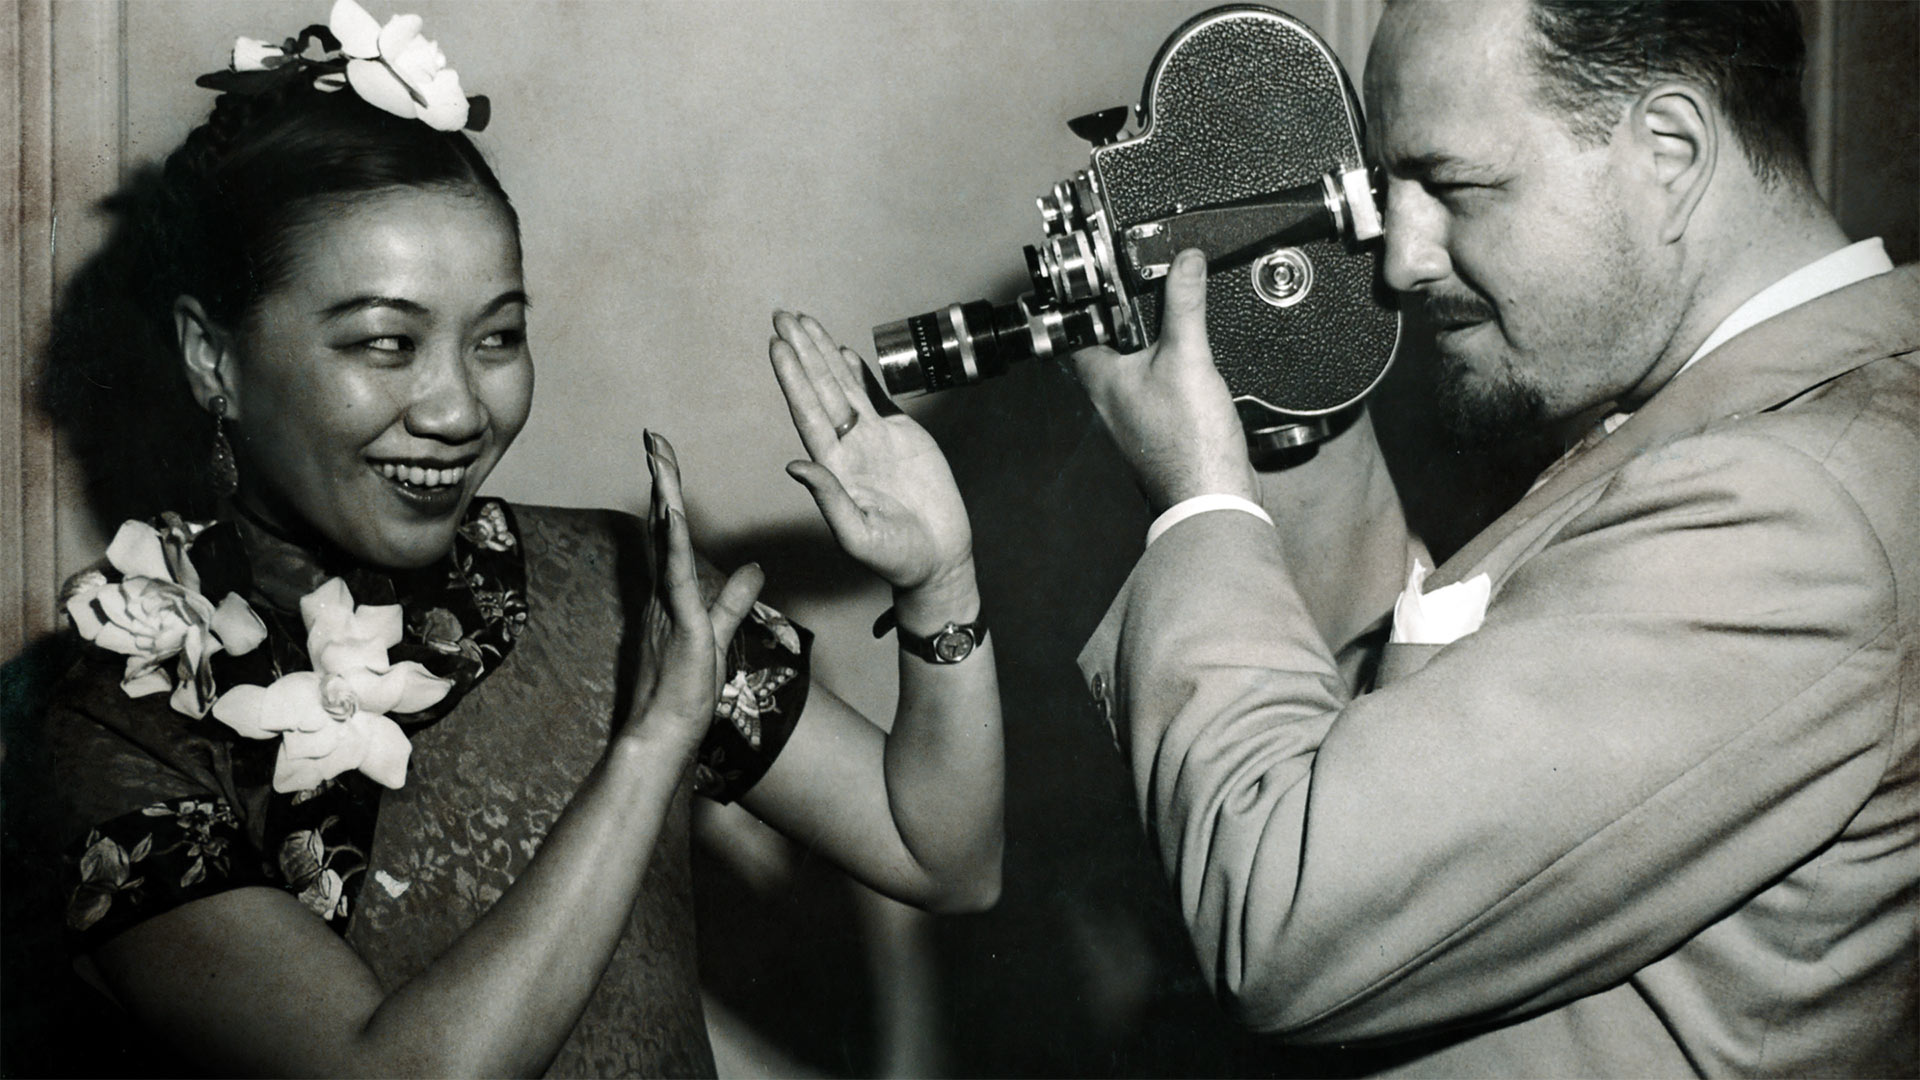 1940s photo of a man with handheld video camera pointing at smiling woman with flowers